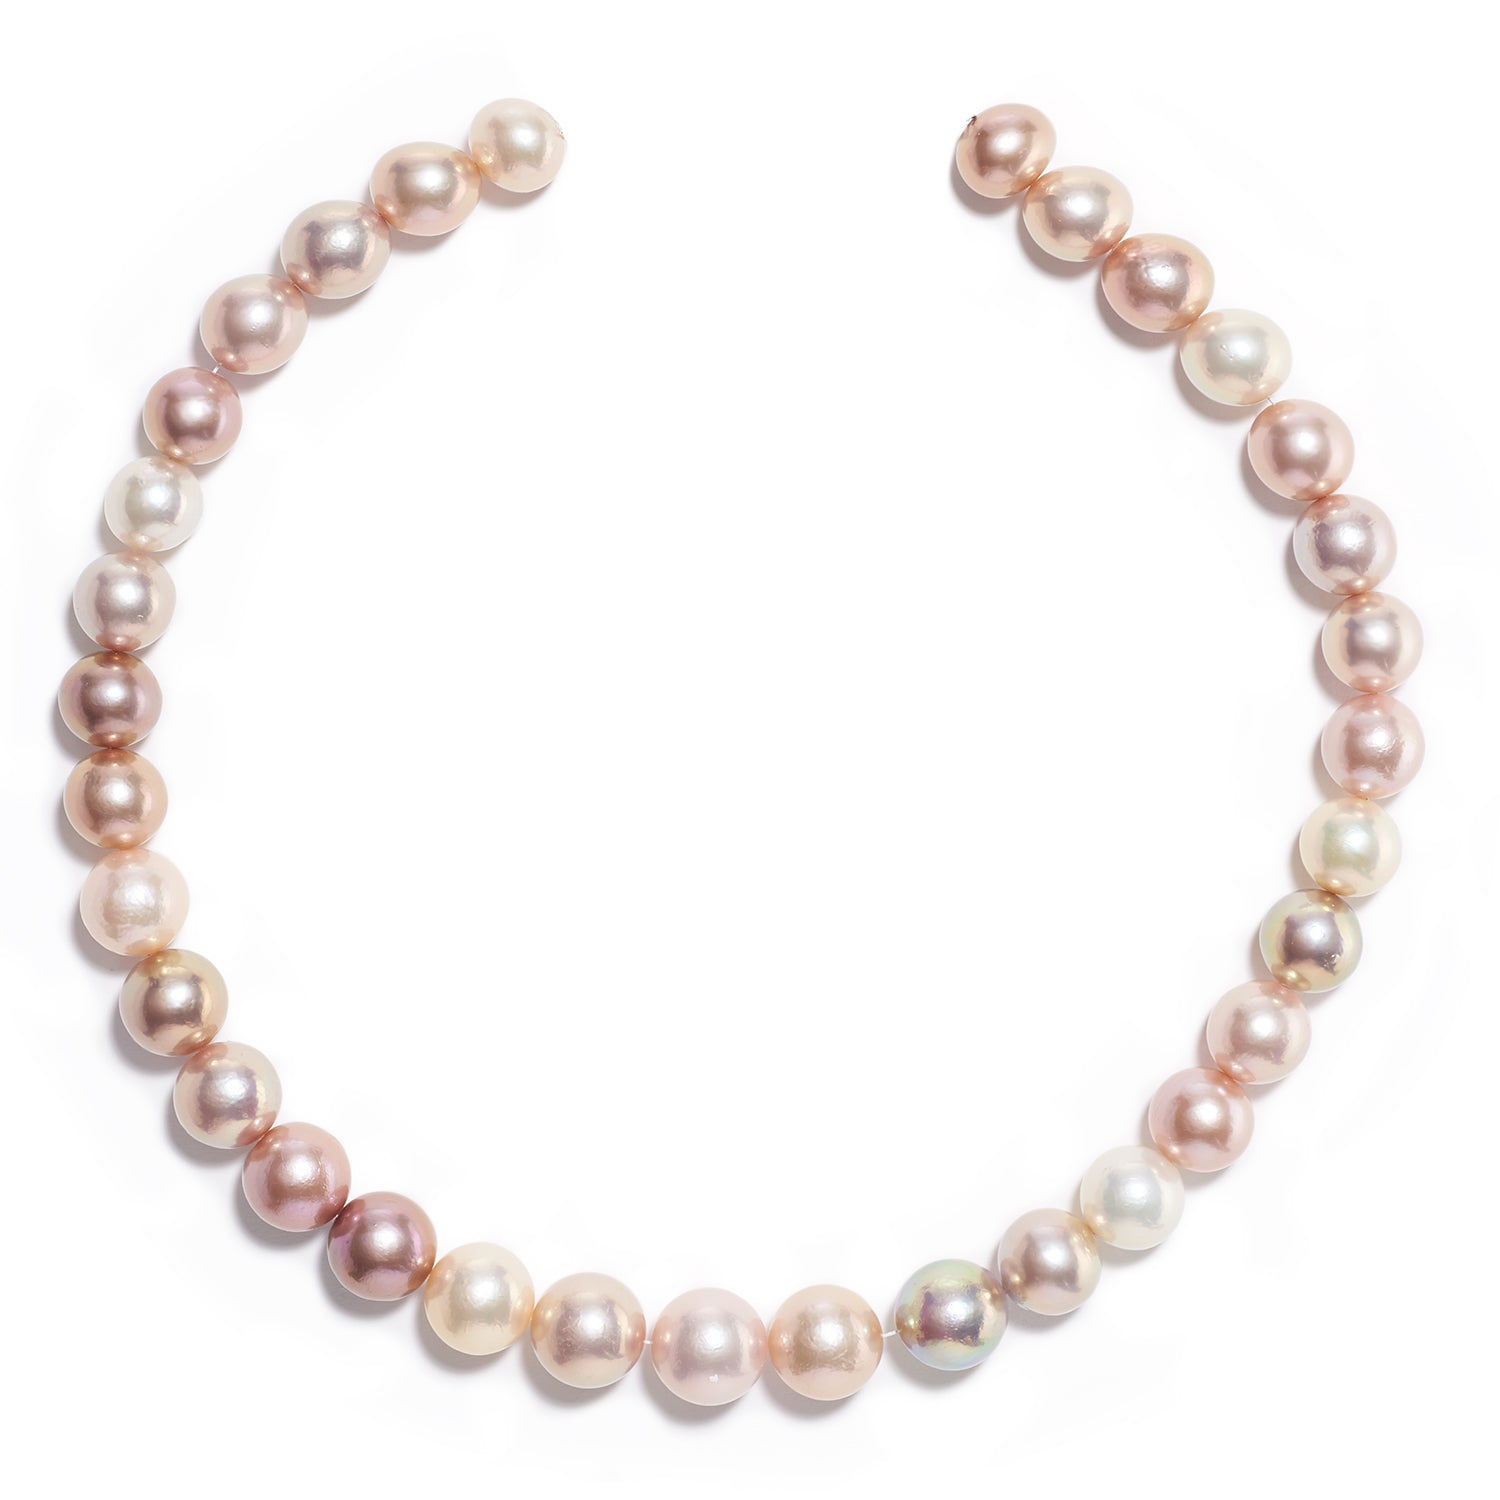 Sunny Pink Medley Edison Freshwater Pearls